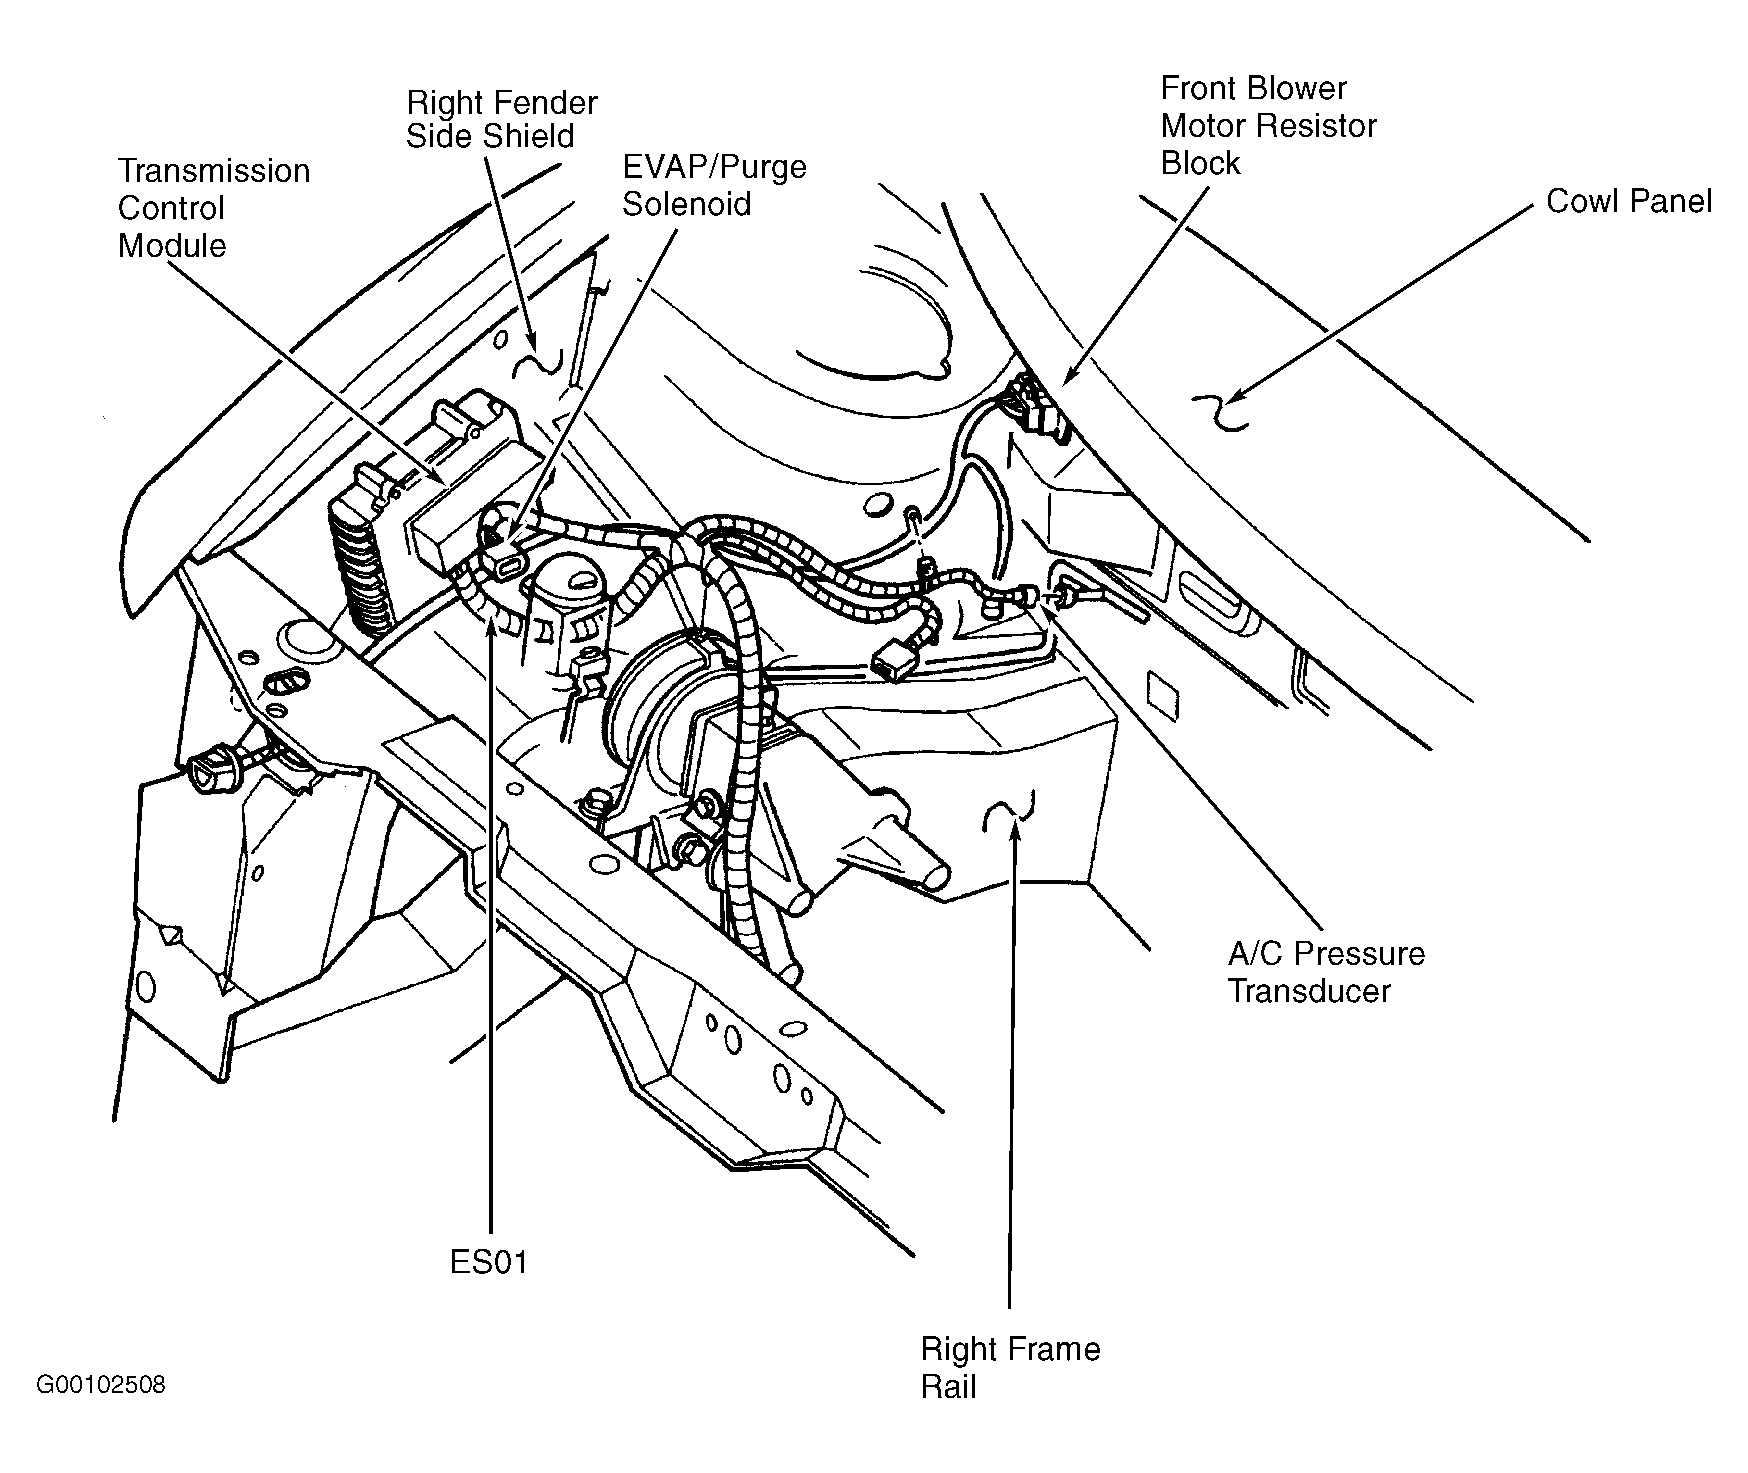 Dodge Grand Caravan ES 2000 - Component Locations -  Right Side Of Engine Compartment